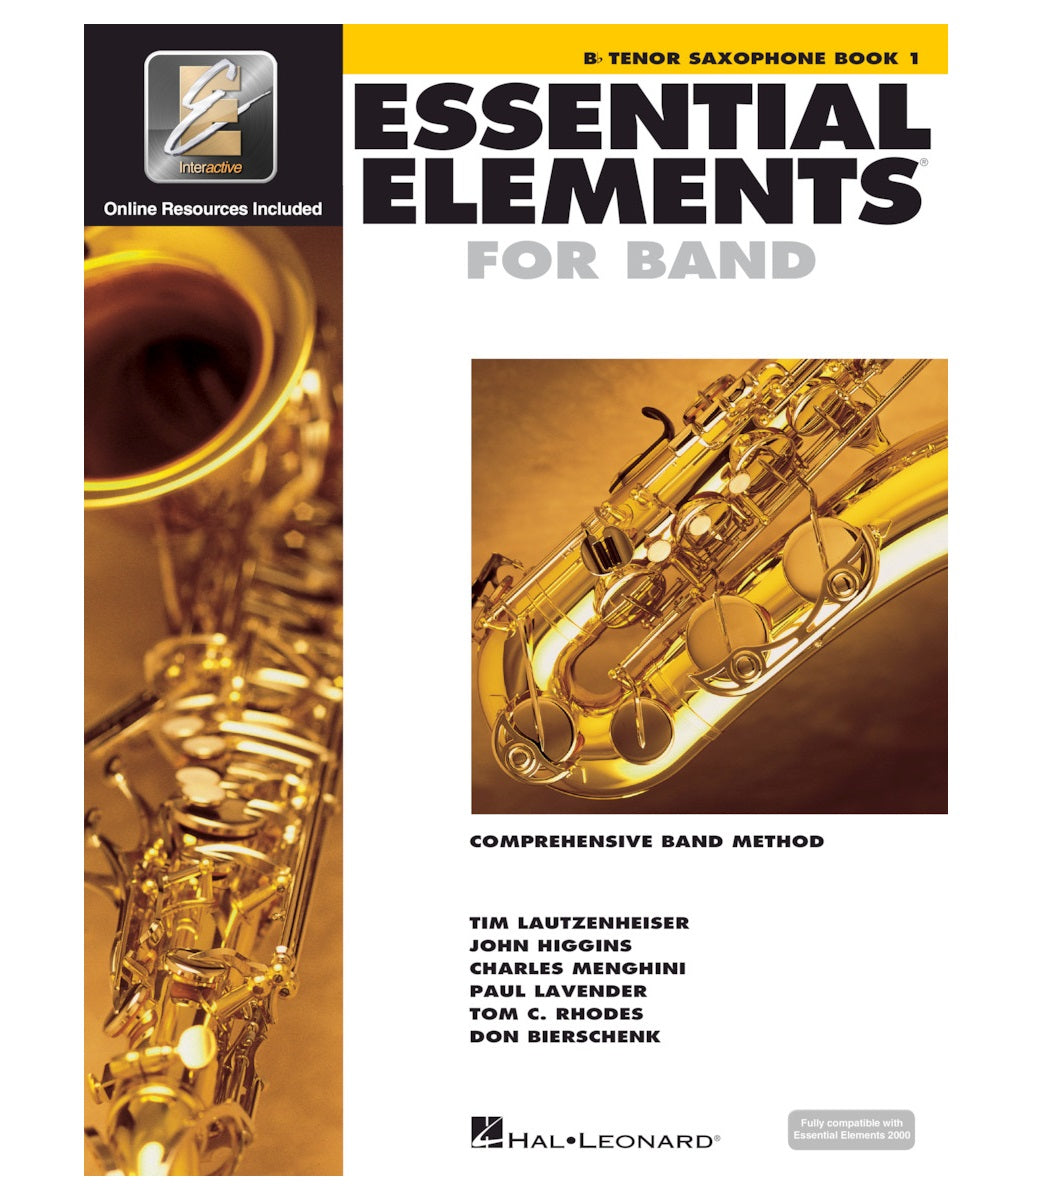 Essential Elements for Band - Available for All Instruments